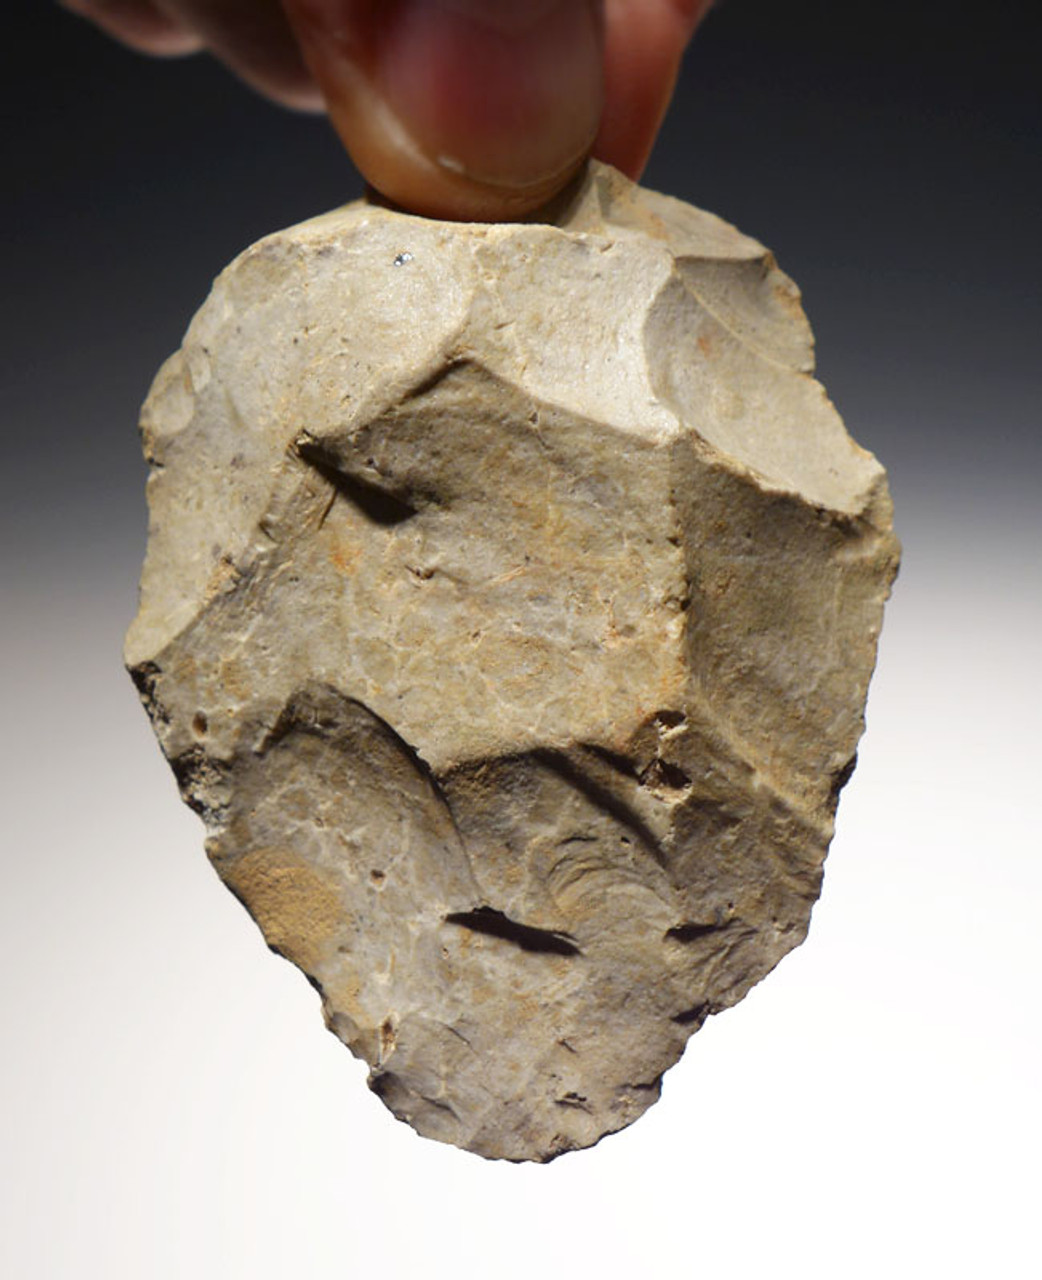 FINEST NEANDERTHAL MOUSTERIAN BIFACE HAND AXE FROM FAMOUS MEGALITHIC STRUCTURE SITE IN FRANCE *M320